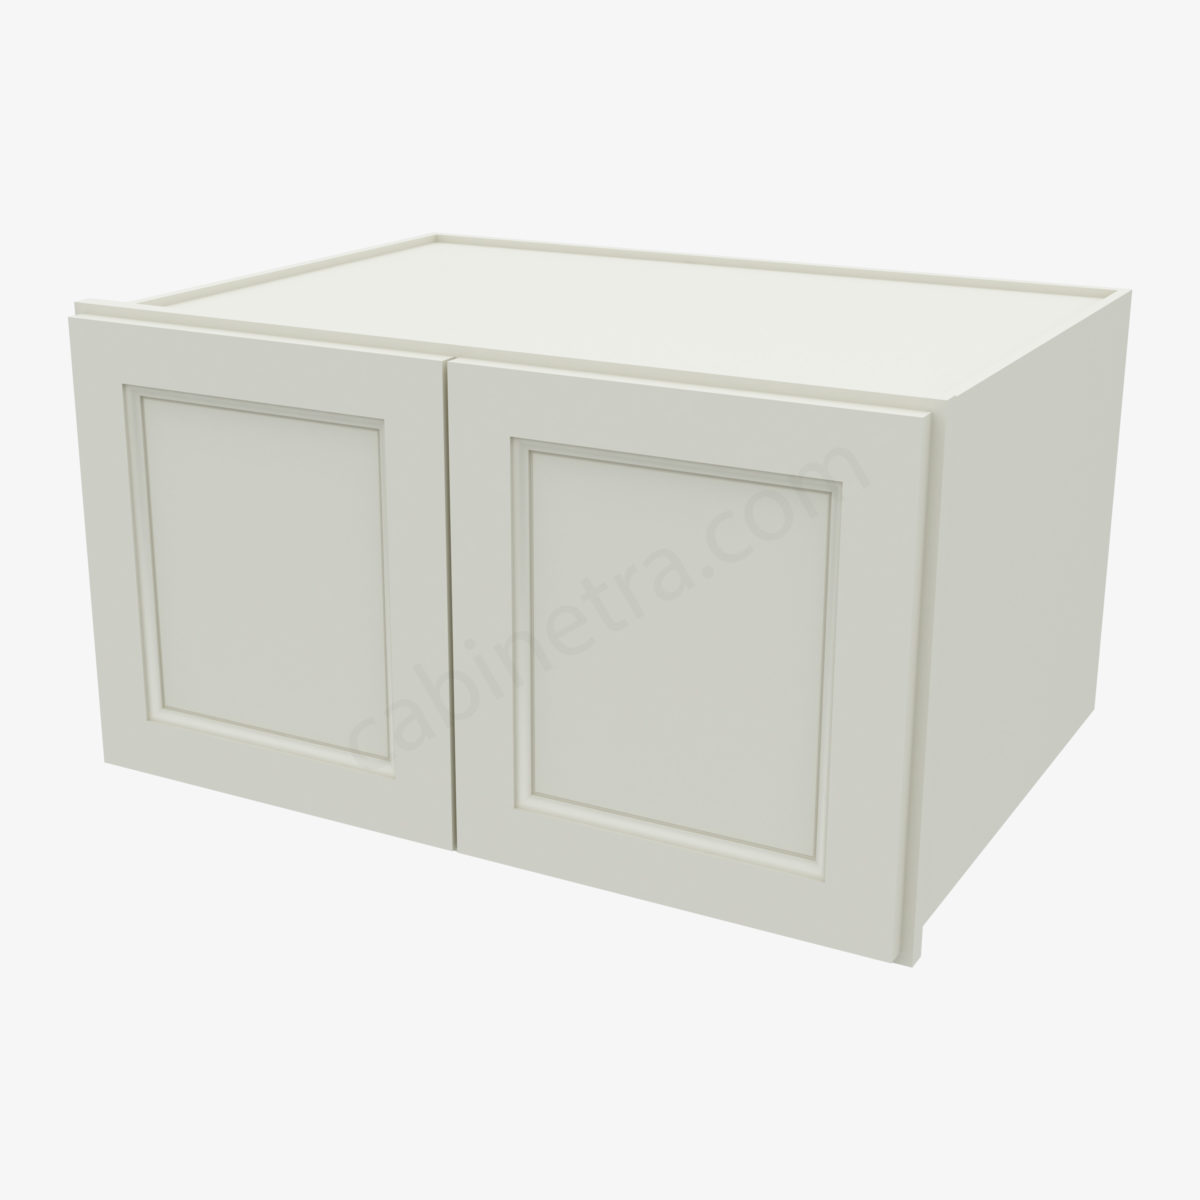 TQ W331824B 0 Forevermark Townplace Crema Cabinetra scaled